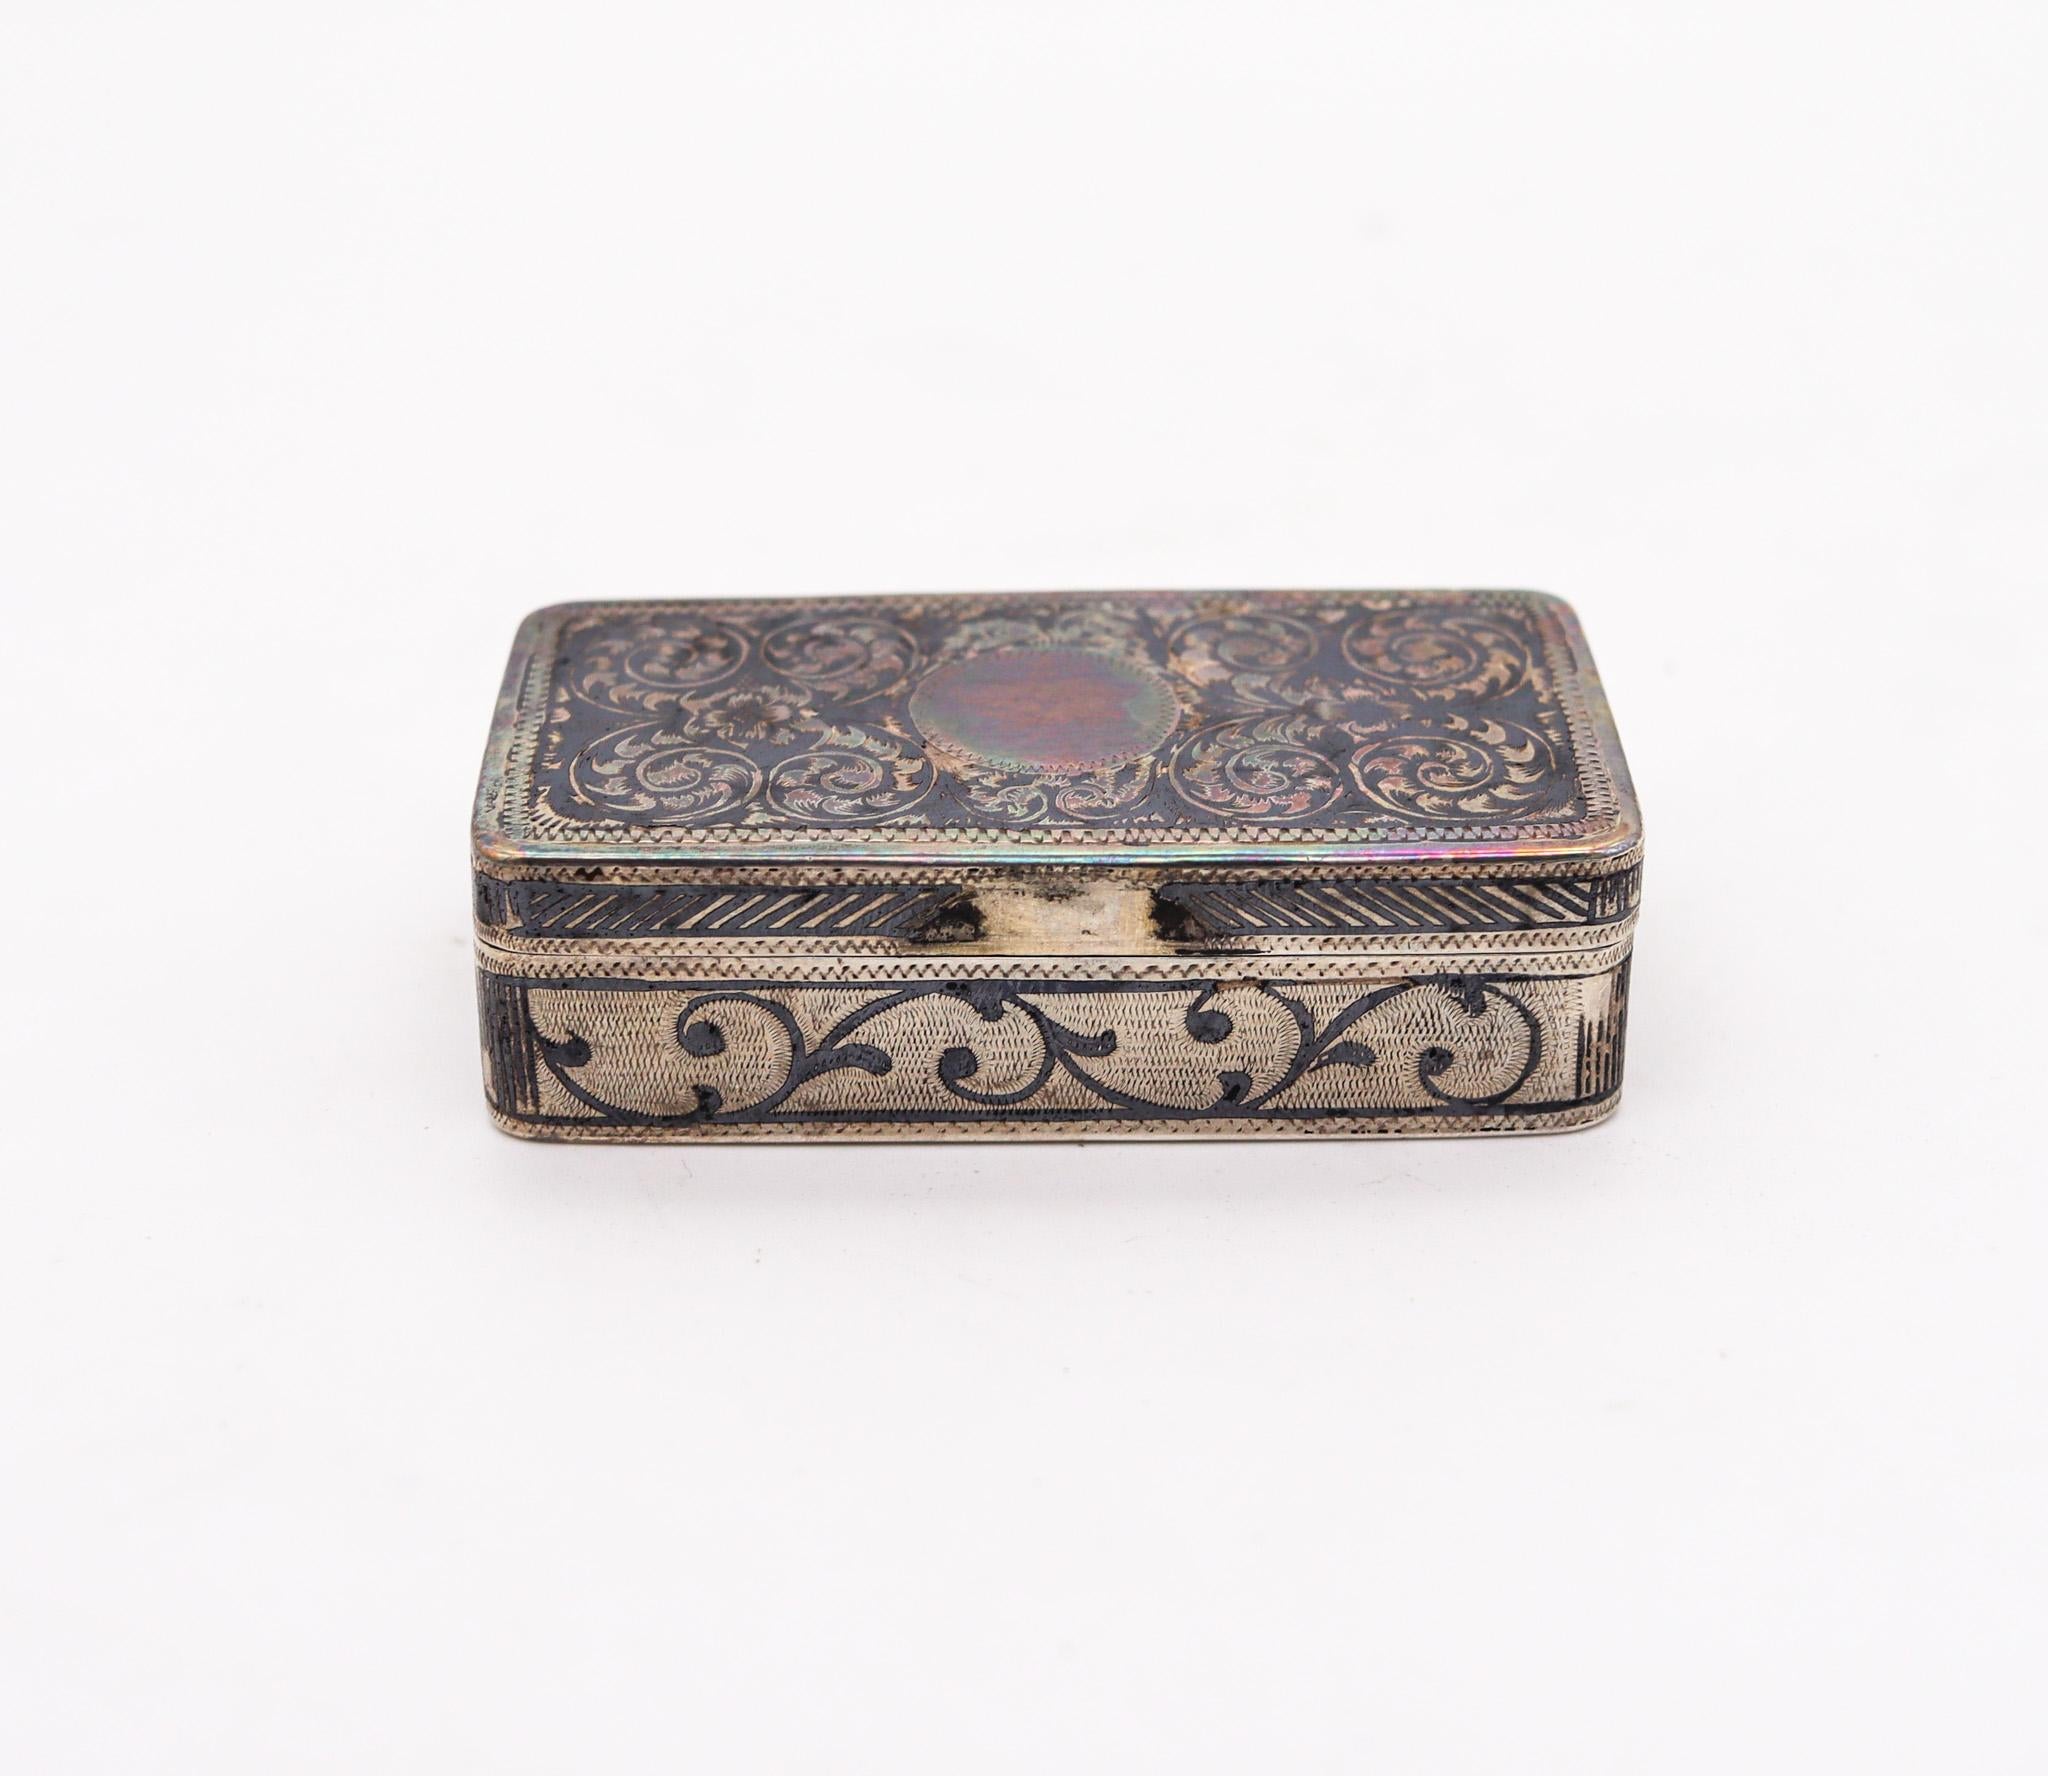 Russian snuff box designed by Ivan Sergeyevich Lebedkin.

Beautiful snuff box, created in Moscow Russia, at the workshop of Ivan Sergeyevich Lebedkin, active between the 1898 to 1914. This piece has been carefully crafted in the Russian style, in